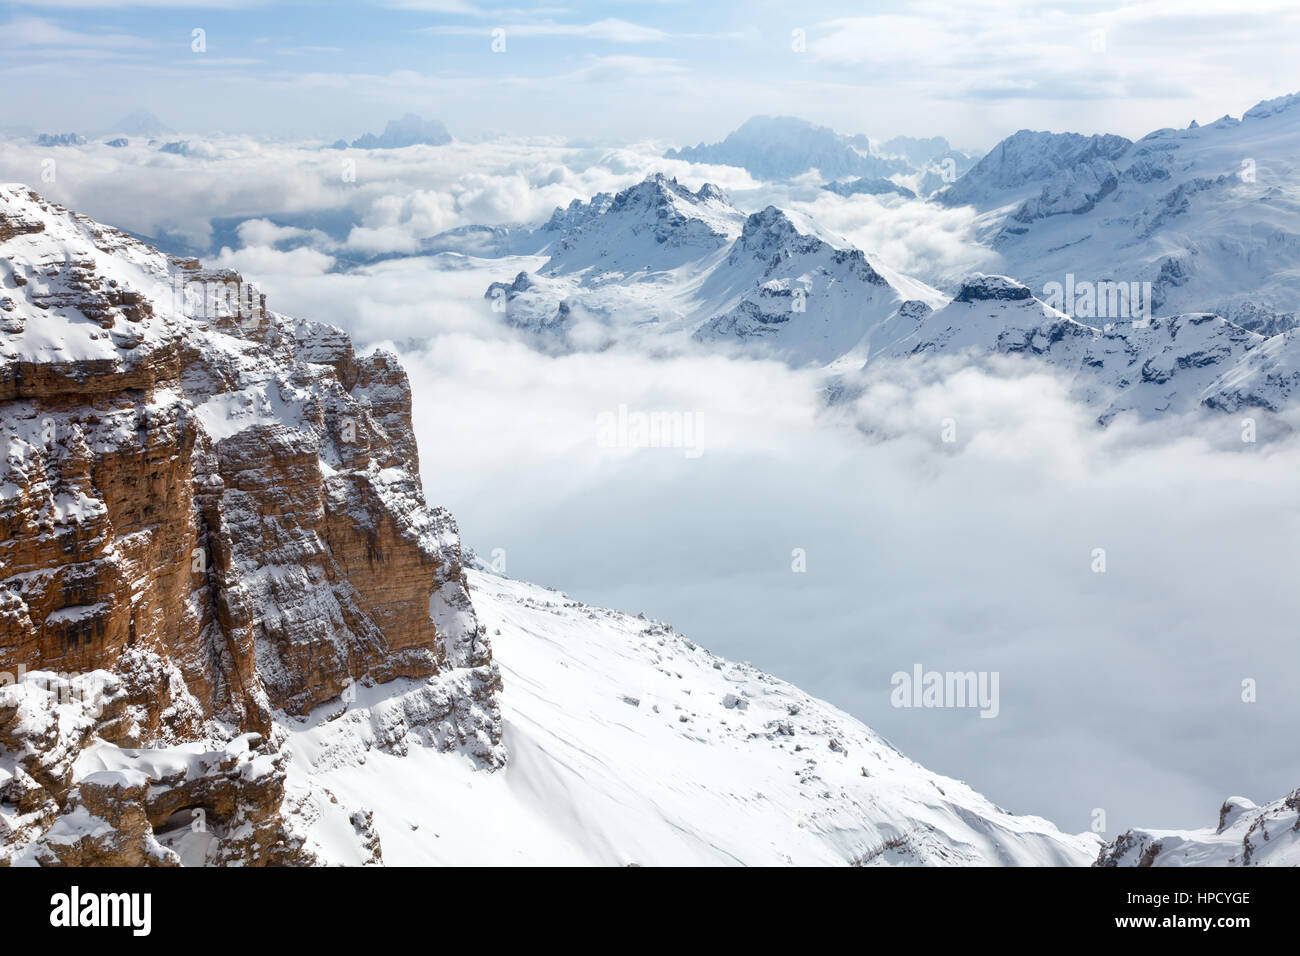 Italian Alps with the Sella group in front and the Marmolada group in background Stock Photo